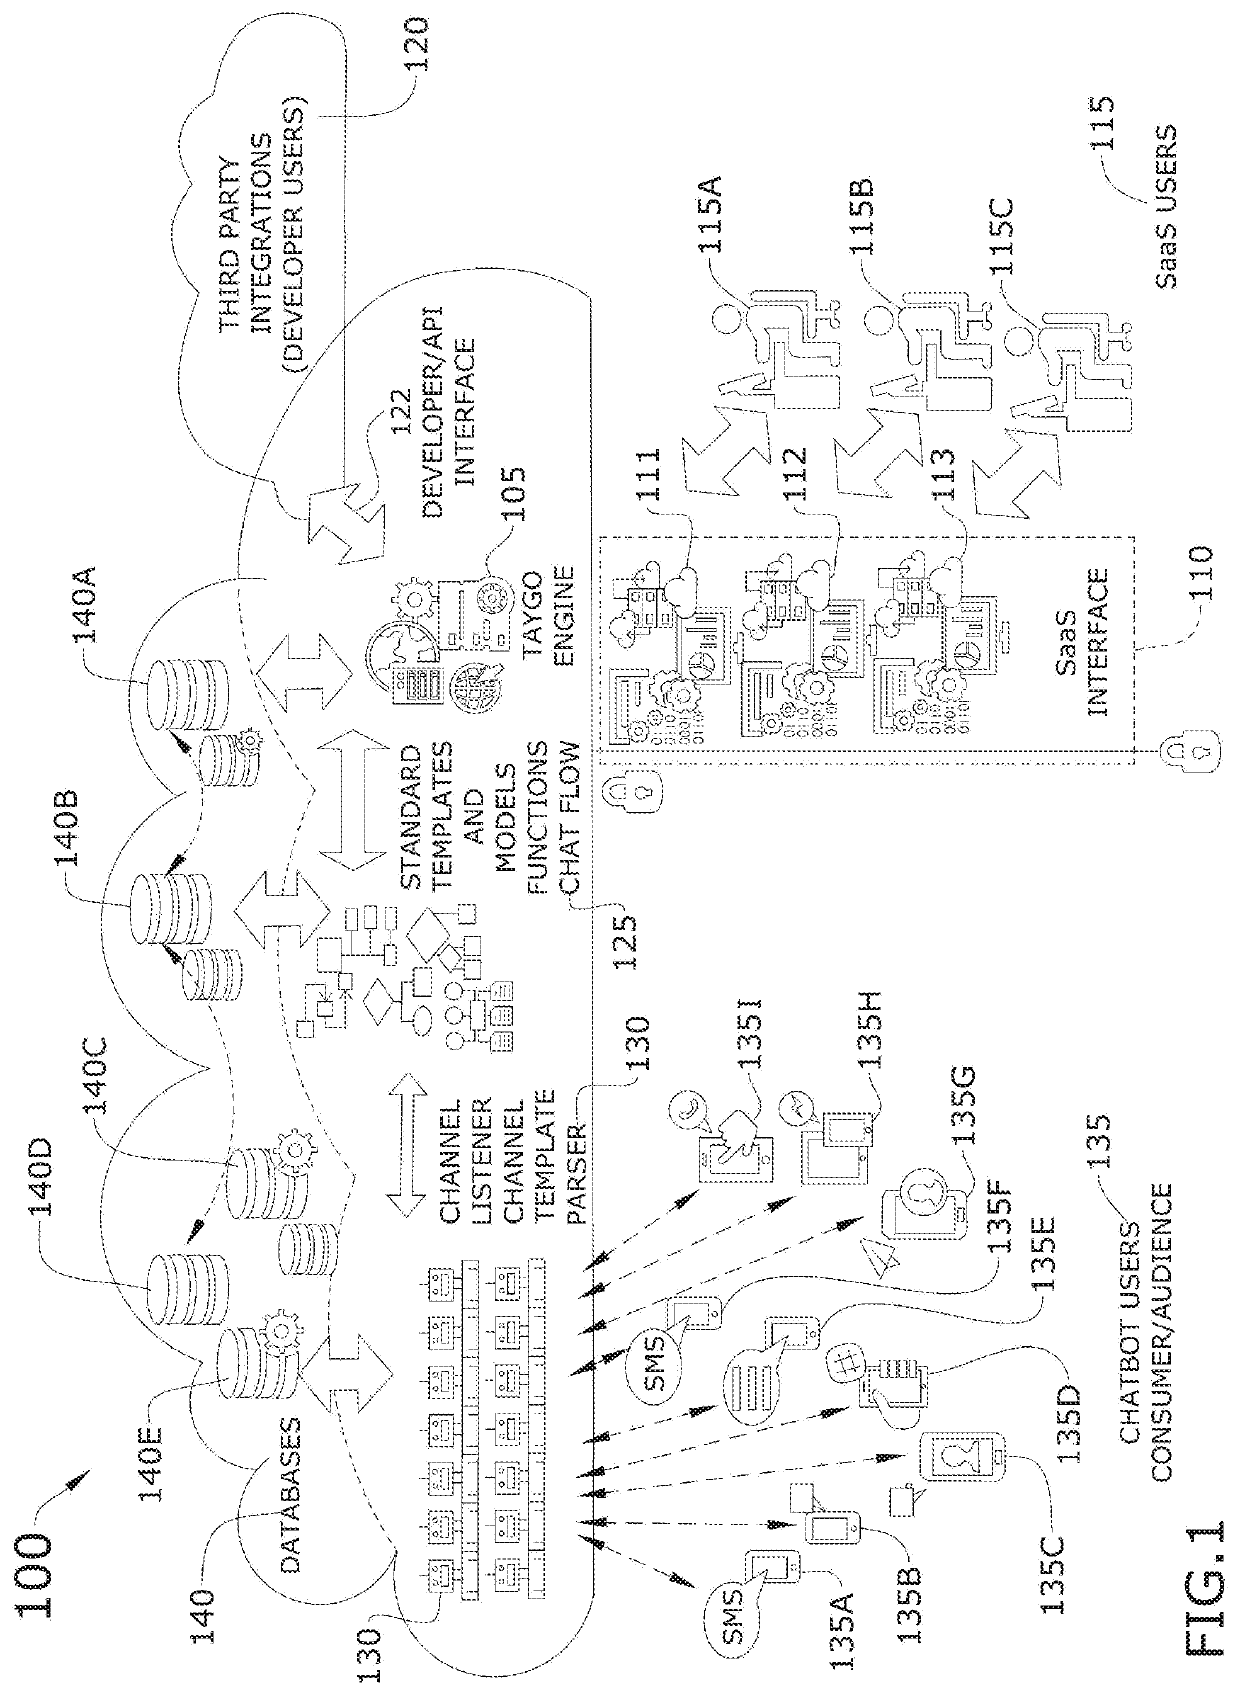 Conversational and live interactions development and marketplace distribution system and process